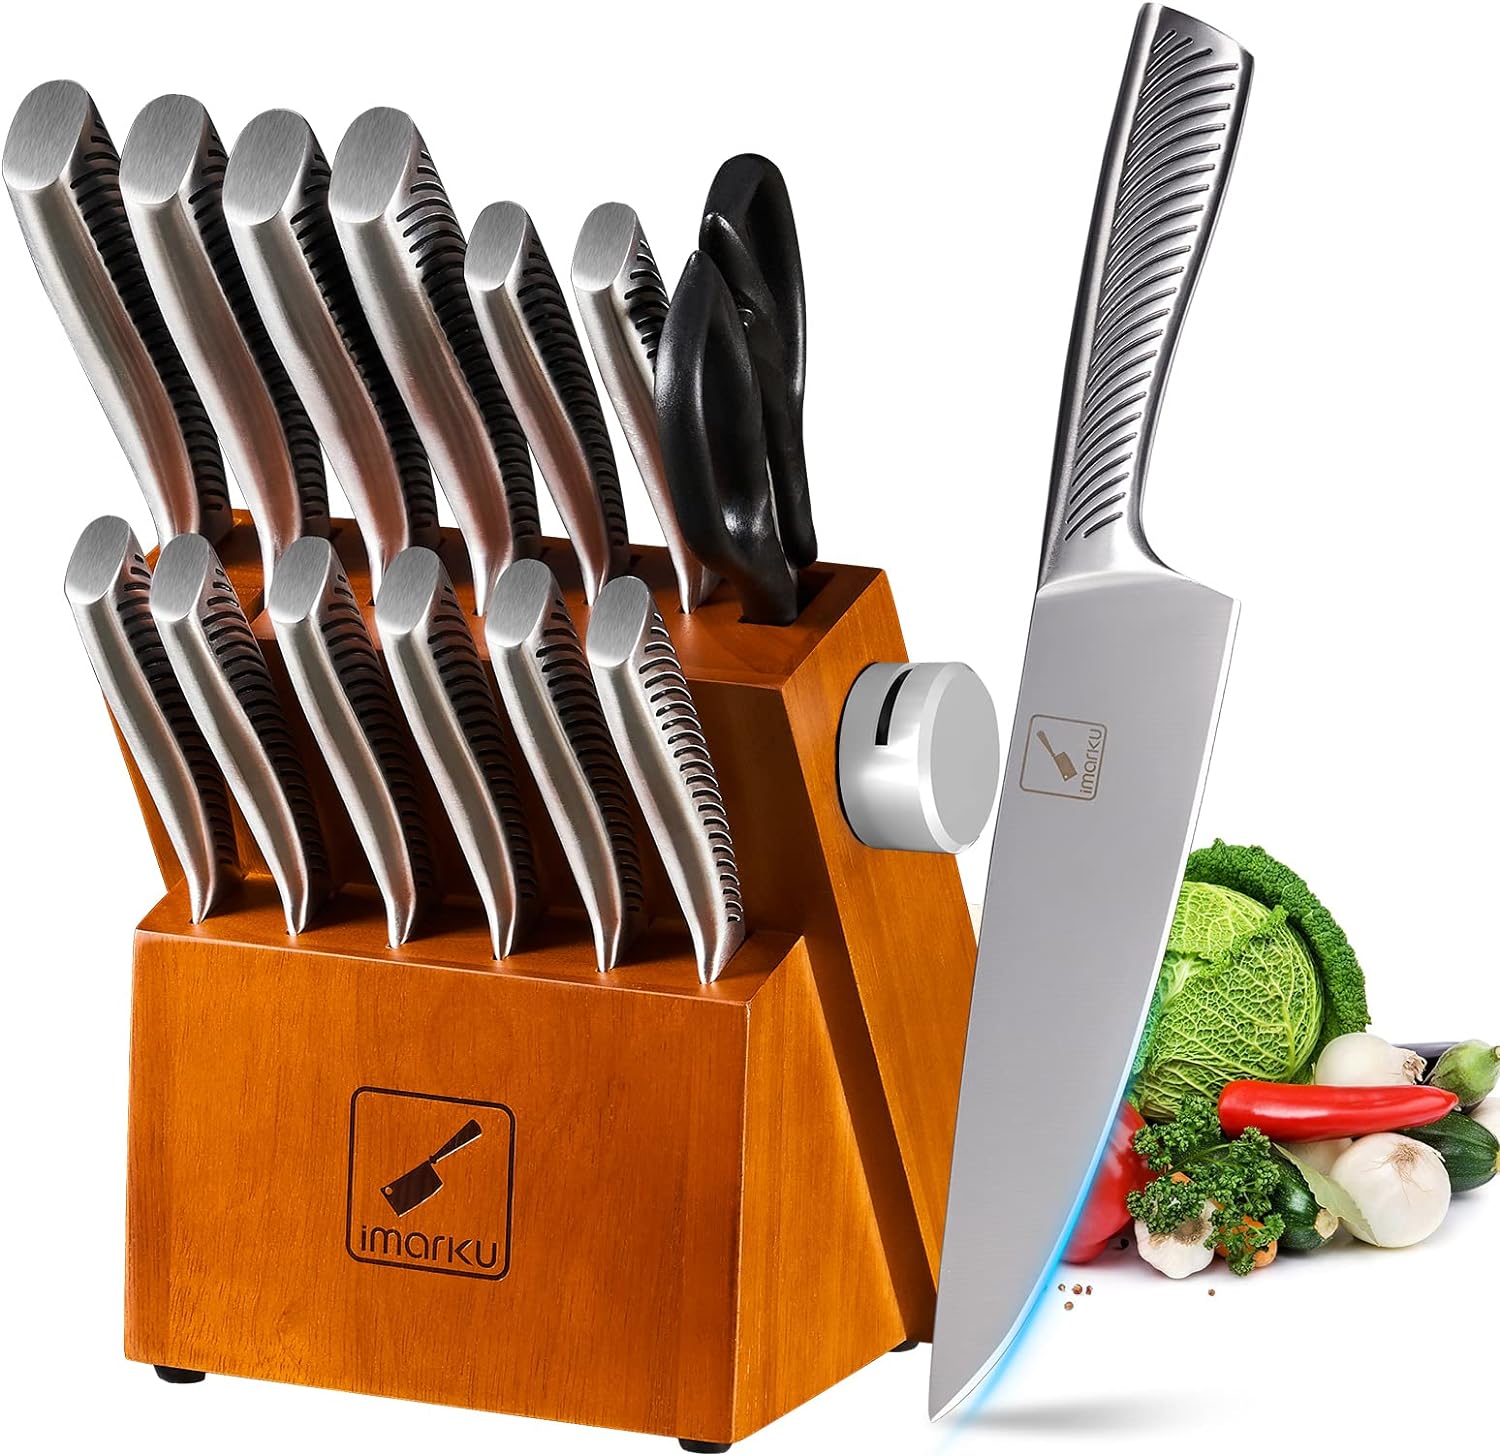 EatNeat 12 Piece Kitchen Knife Set - 5 Black Stainless Steel Knives with  Safety Sheaths, a Cutting Board, and a Sharpener for Sale in Pinole, CA -  OfferUp